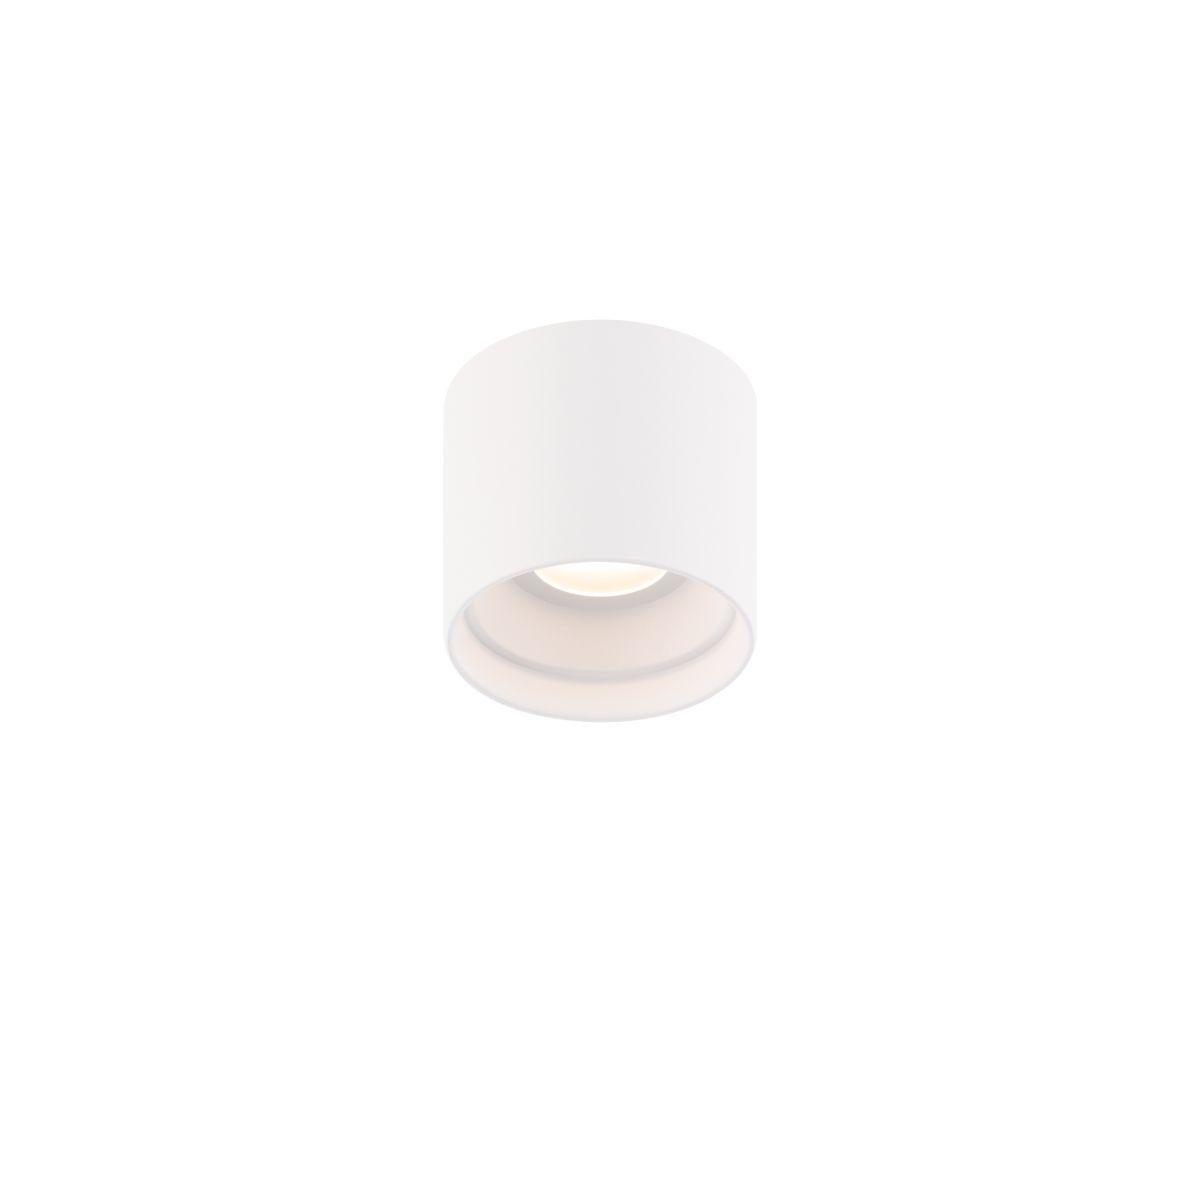 DOWNTOWN 5 in. Round LED Outdoor Flush Mount